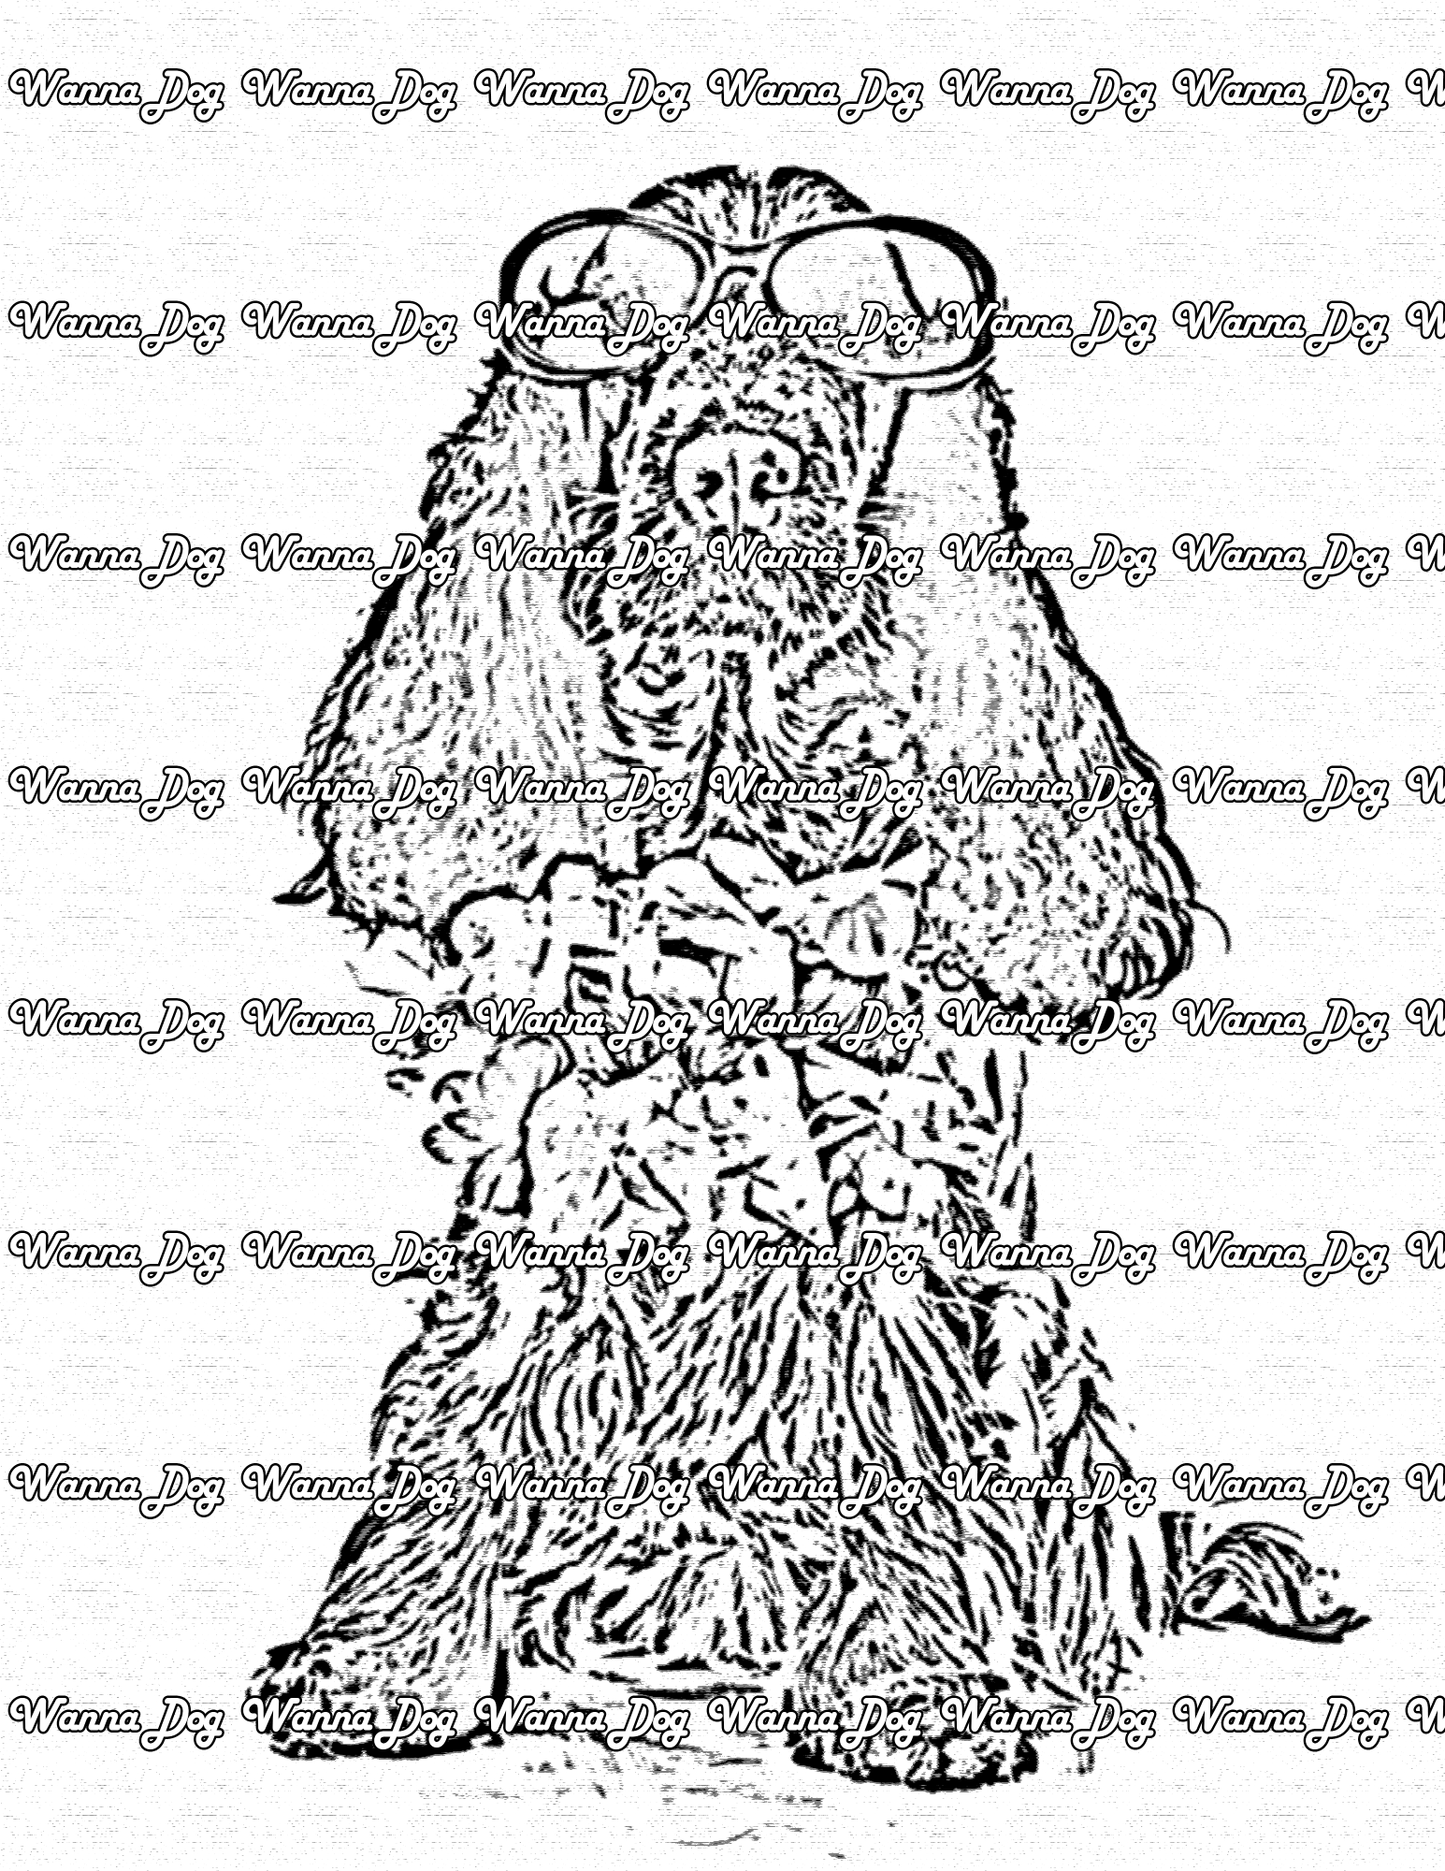 Cocker Spaniel Coloring Pages of a Cocker Spaniel with glasses and a flower necklace